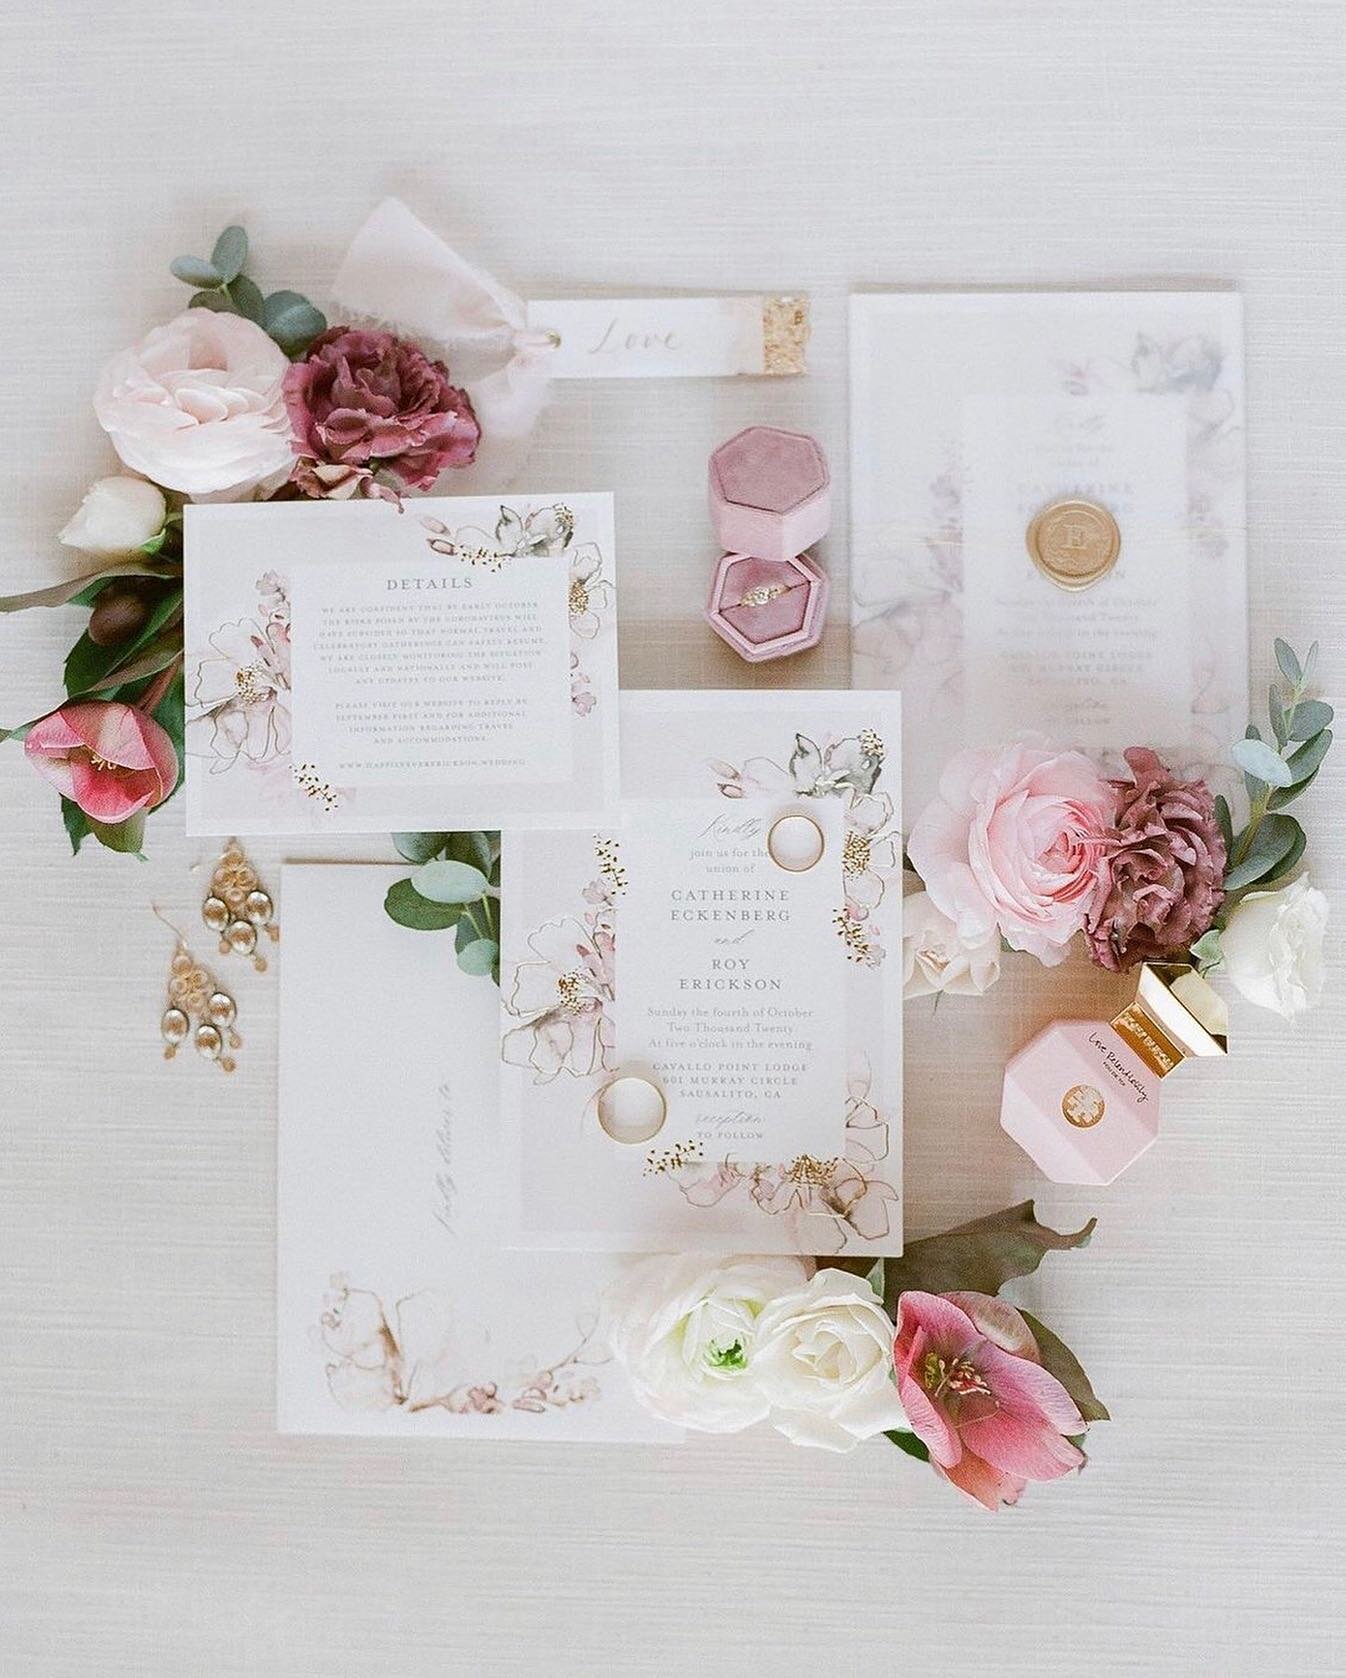 Who loves a good flat lay photo? 🤍 Ask your floral designer + photographer to team up and style all your printed goodies!